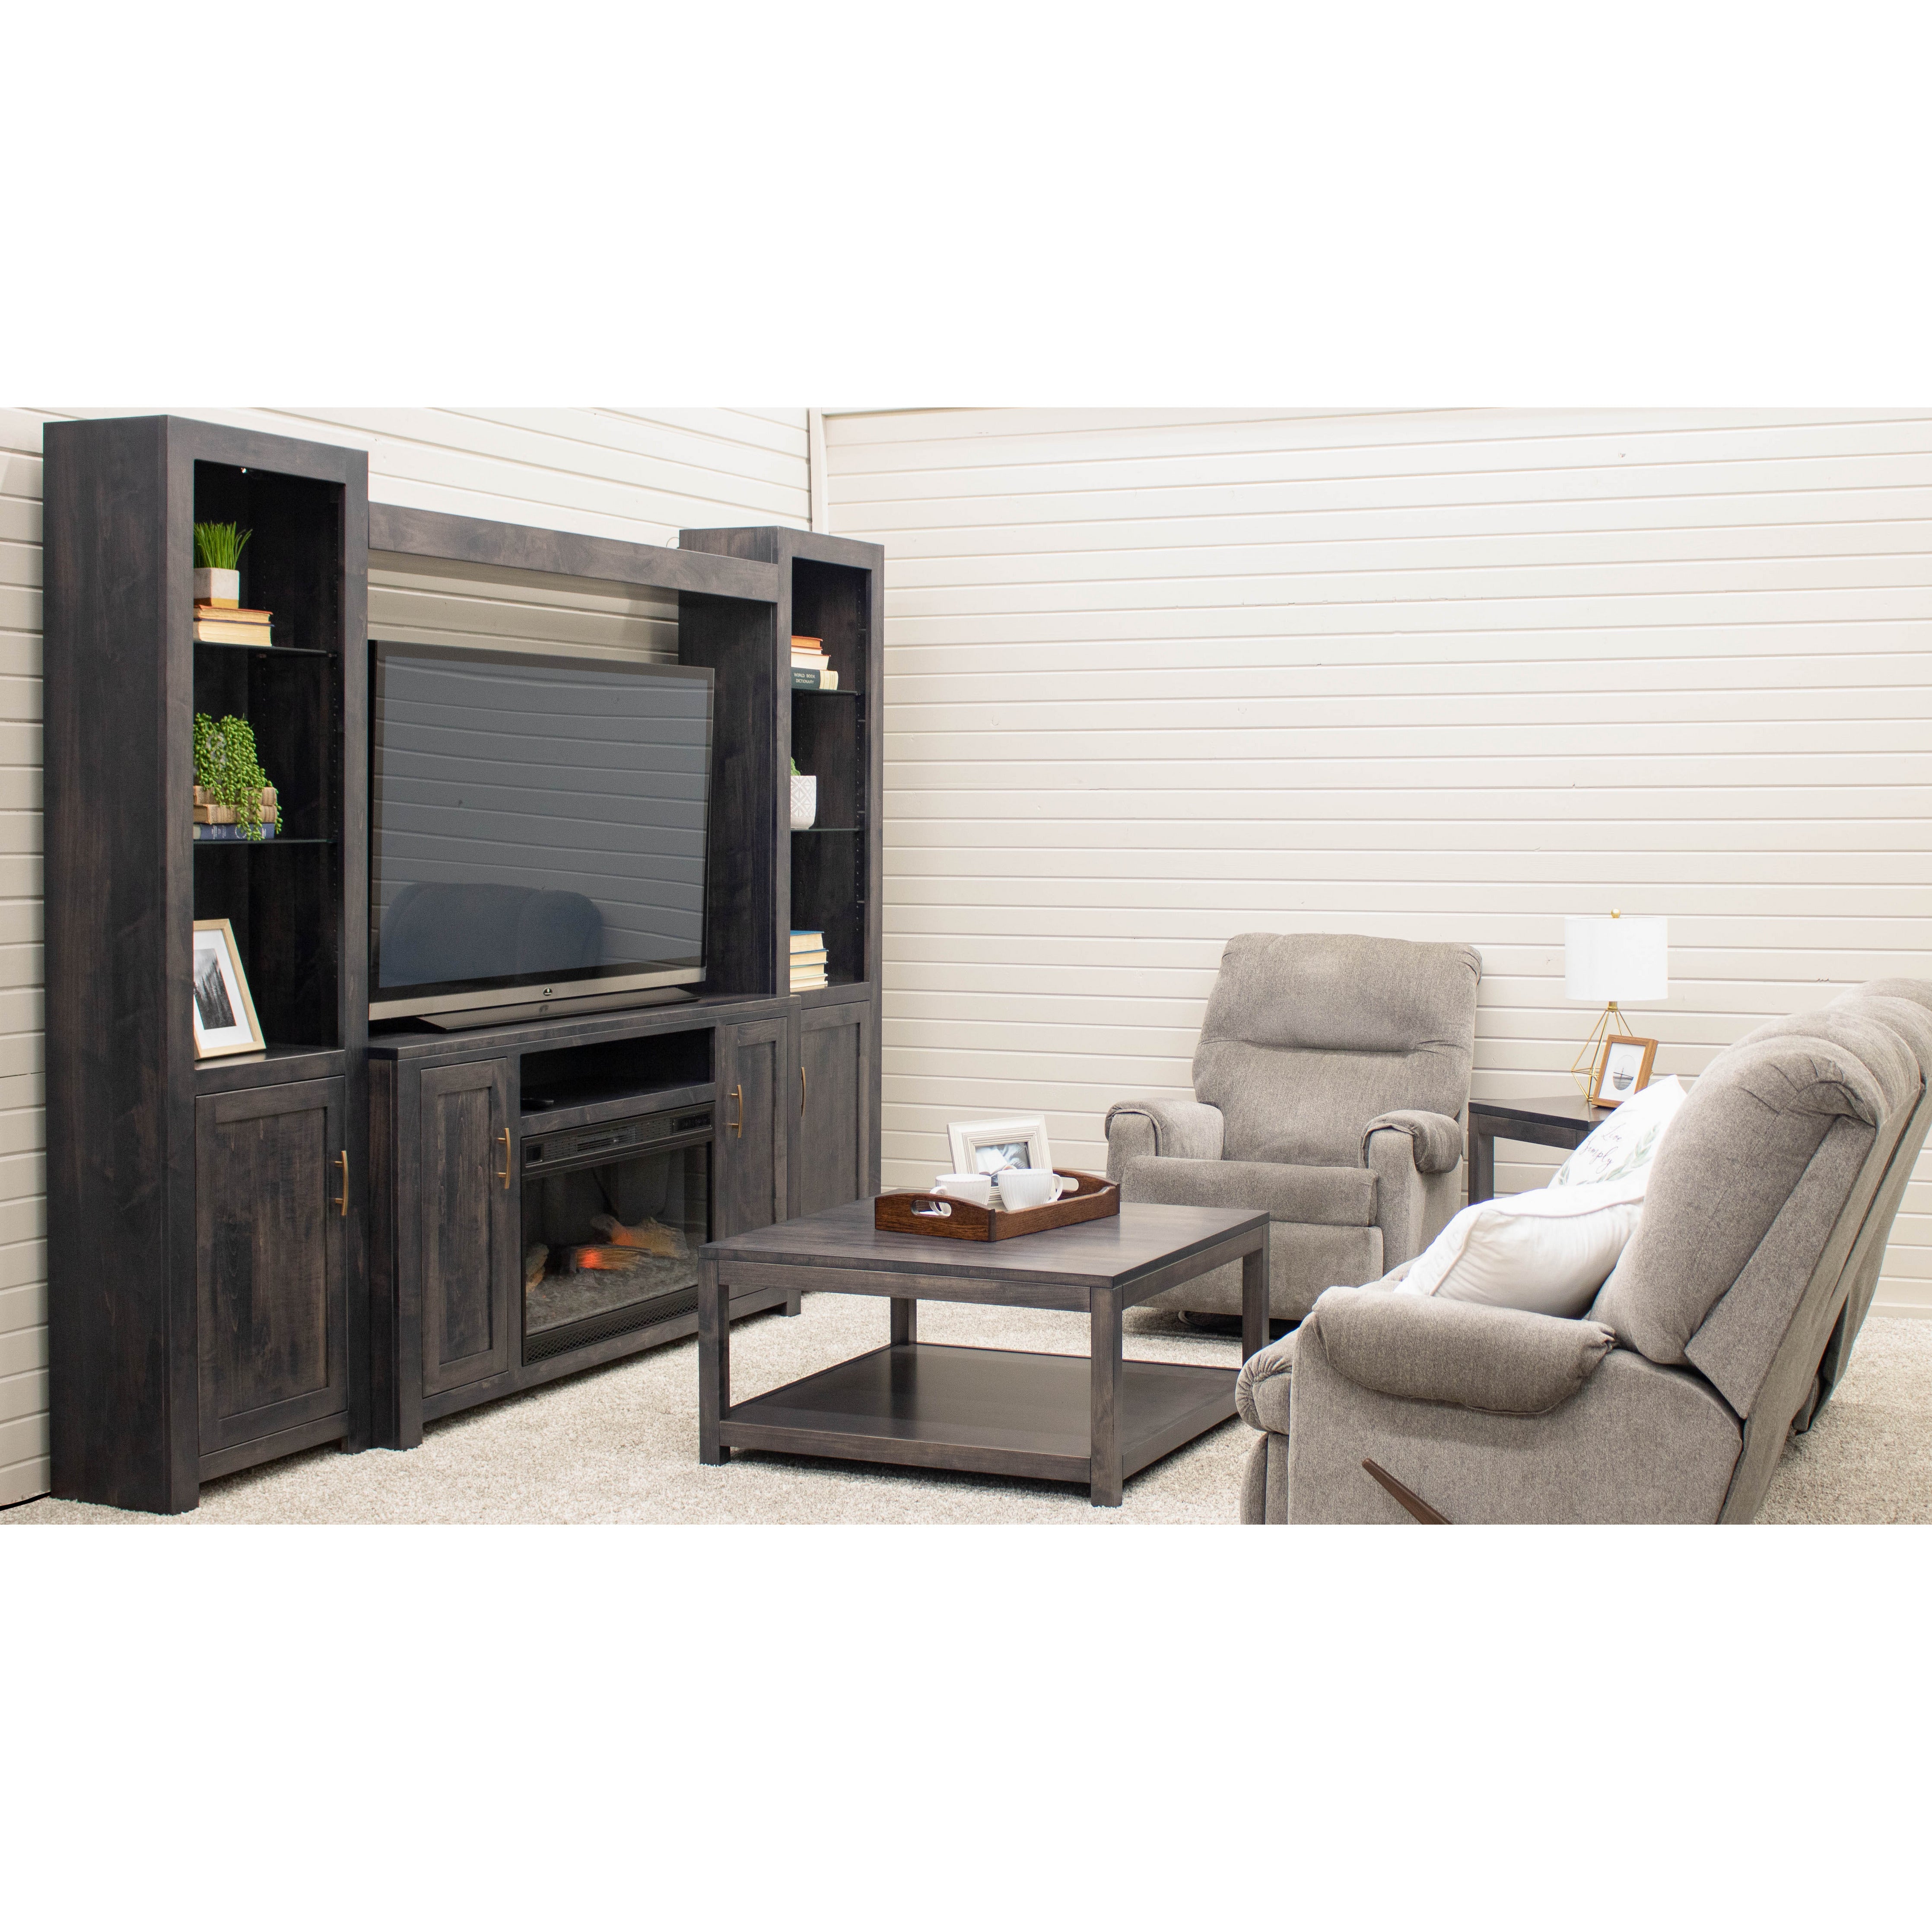 Westbrook Entertainment Center with Electric Fireplace